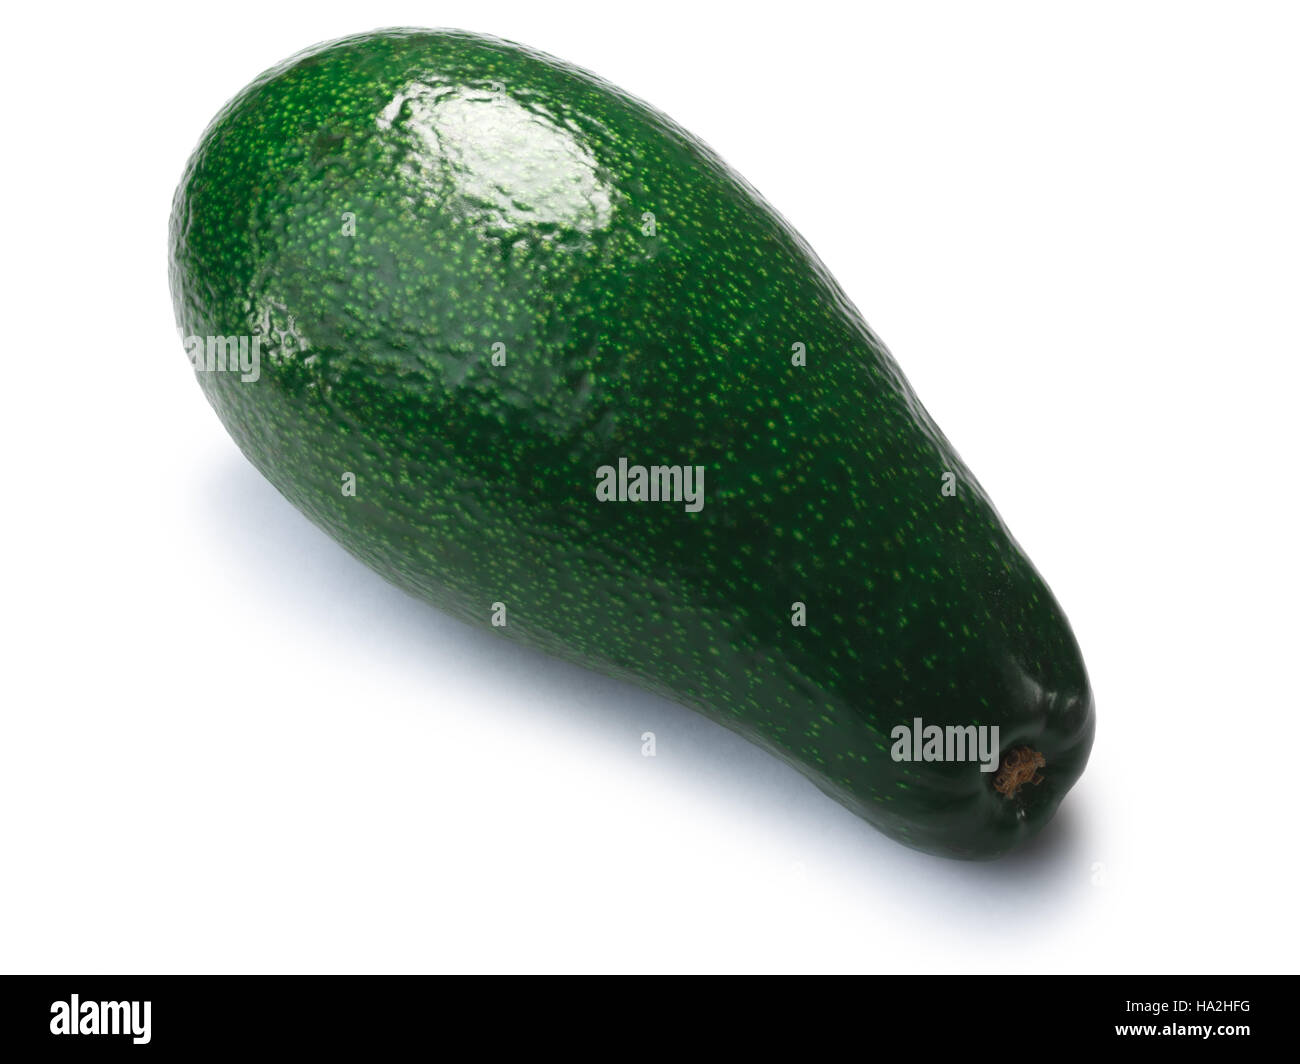 Avocado Fuerte, whole, top view (Persea americana). Clipping paths, shadow separated Stock Photo